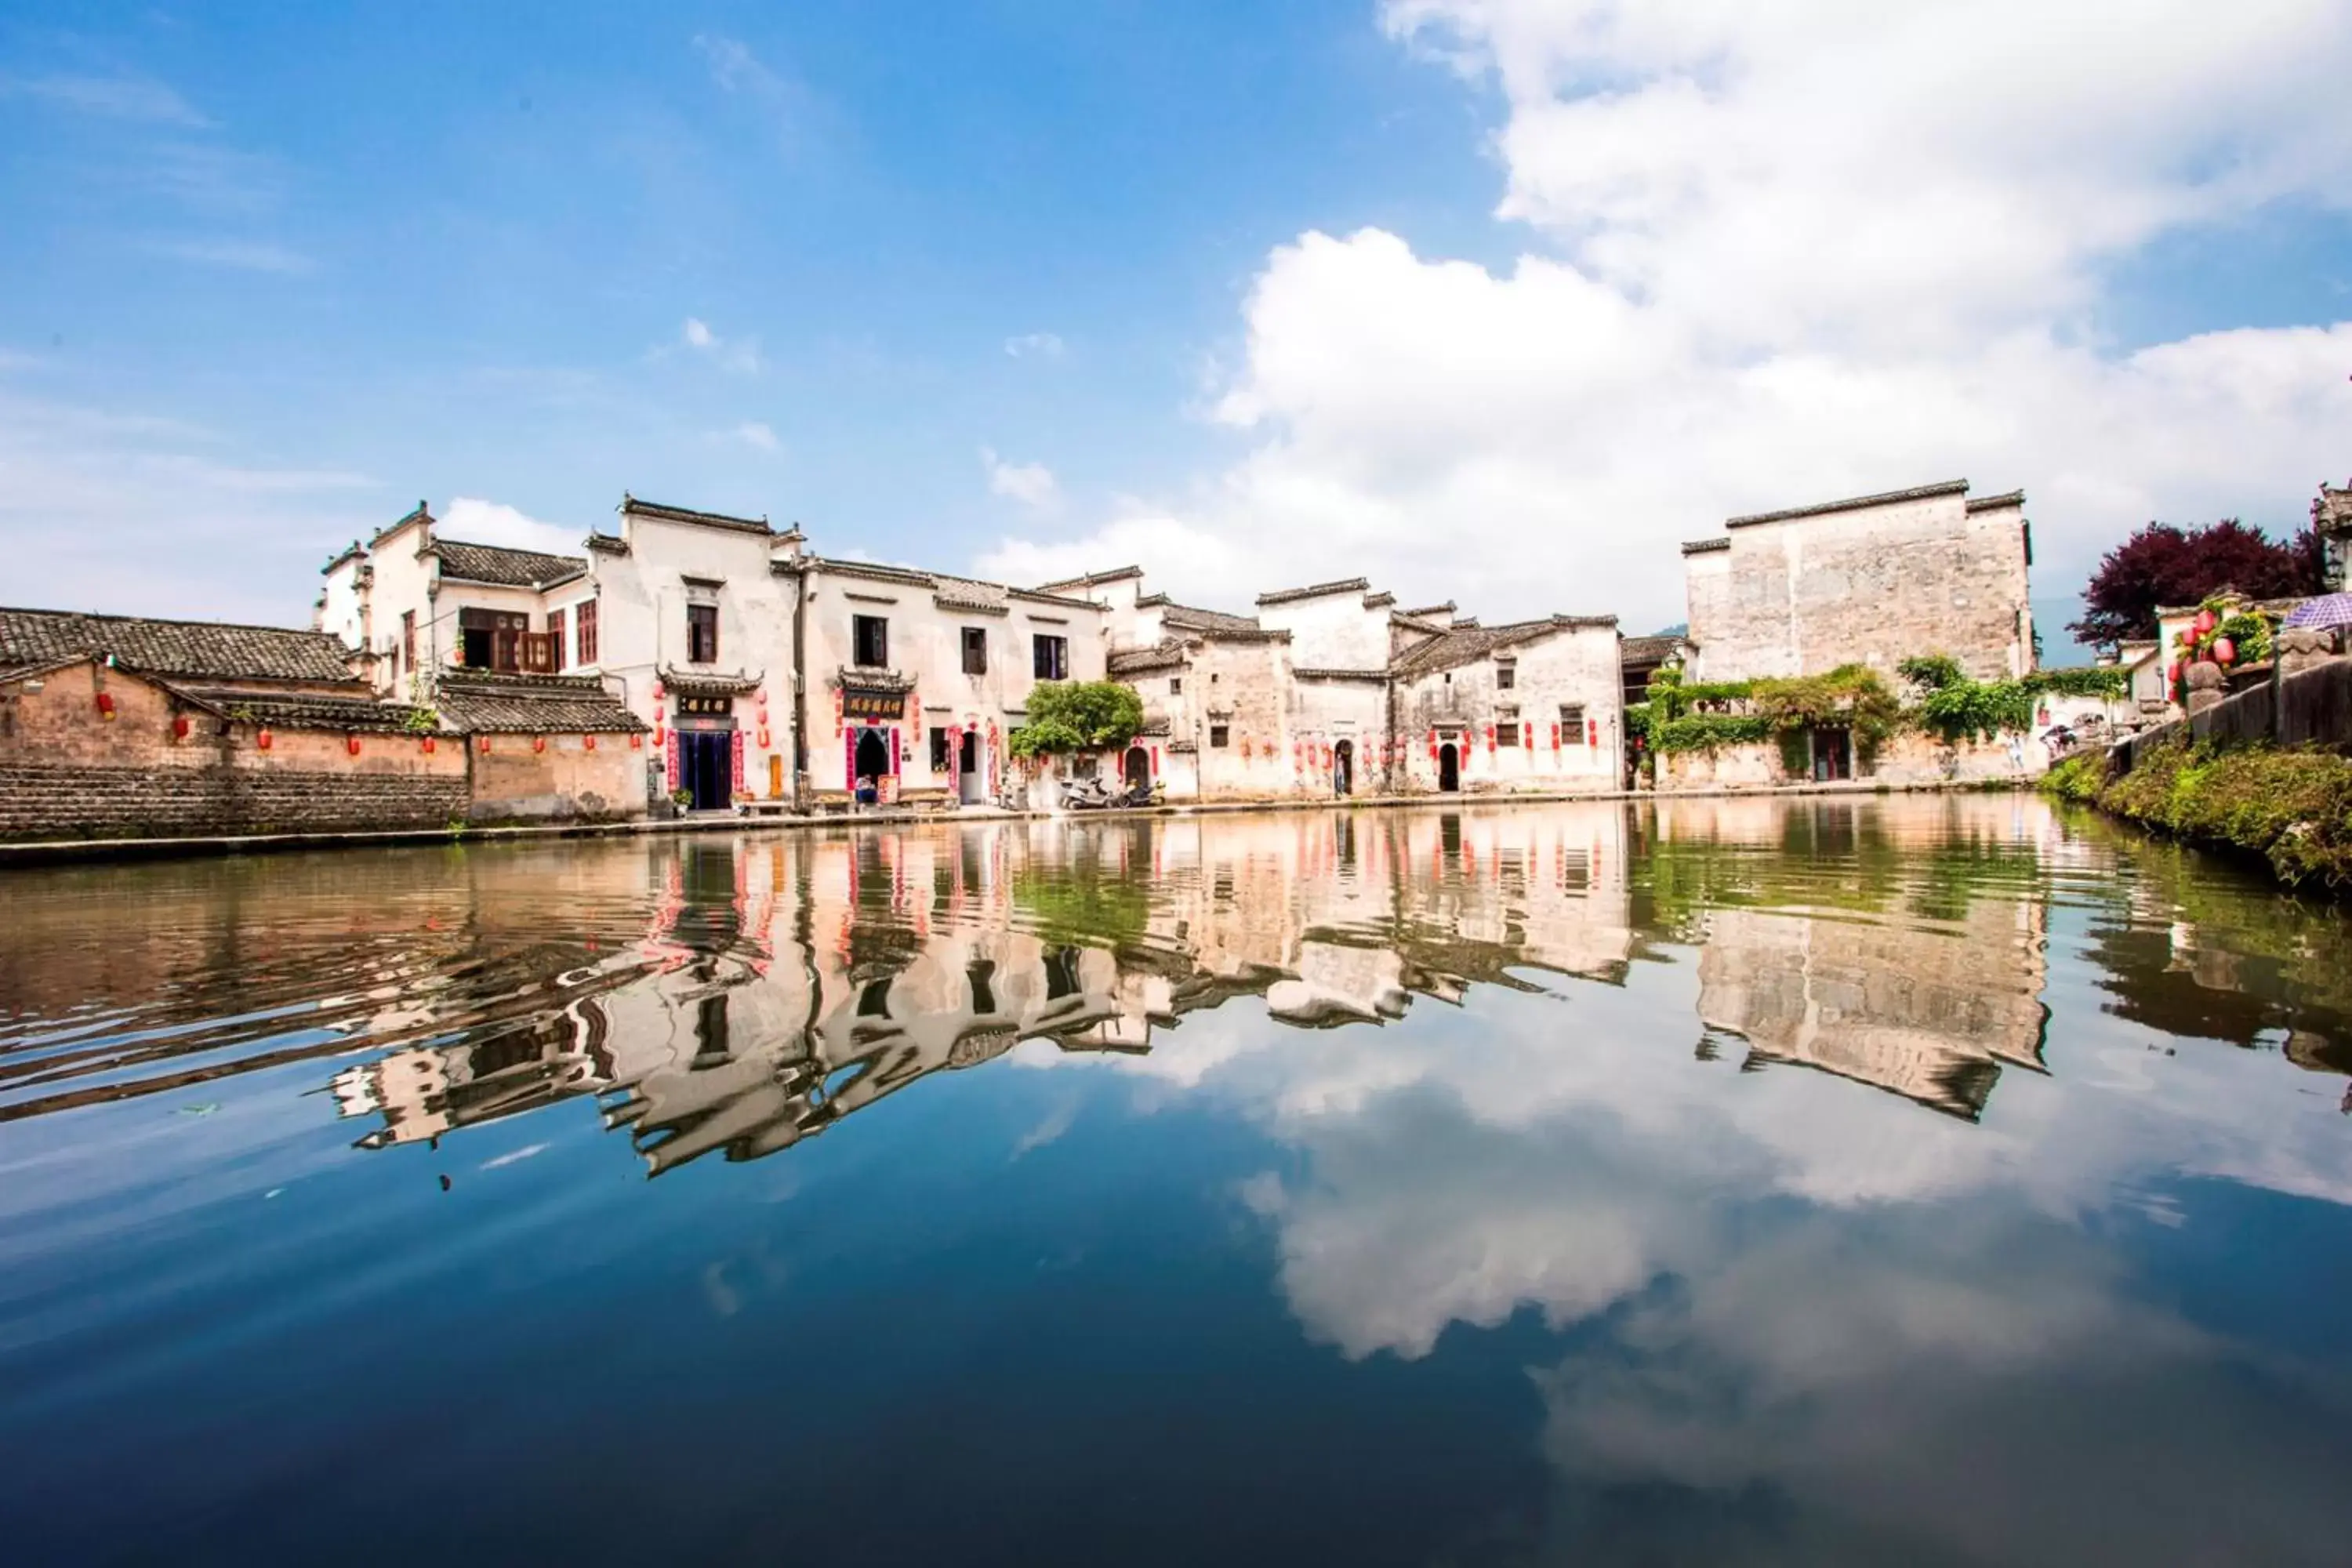 Day, Swimming Pool in Banyan Tree Hotel Huangshan-The Ancient Charm of Huizhou, a Paradise